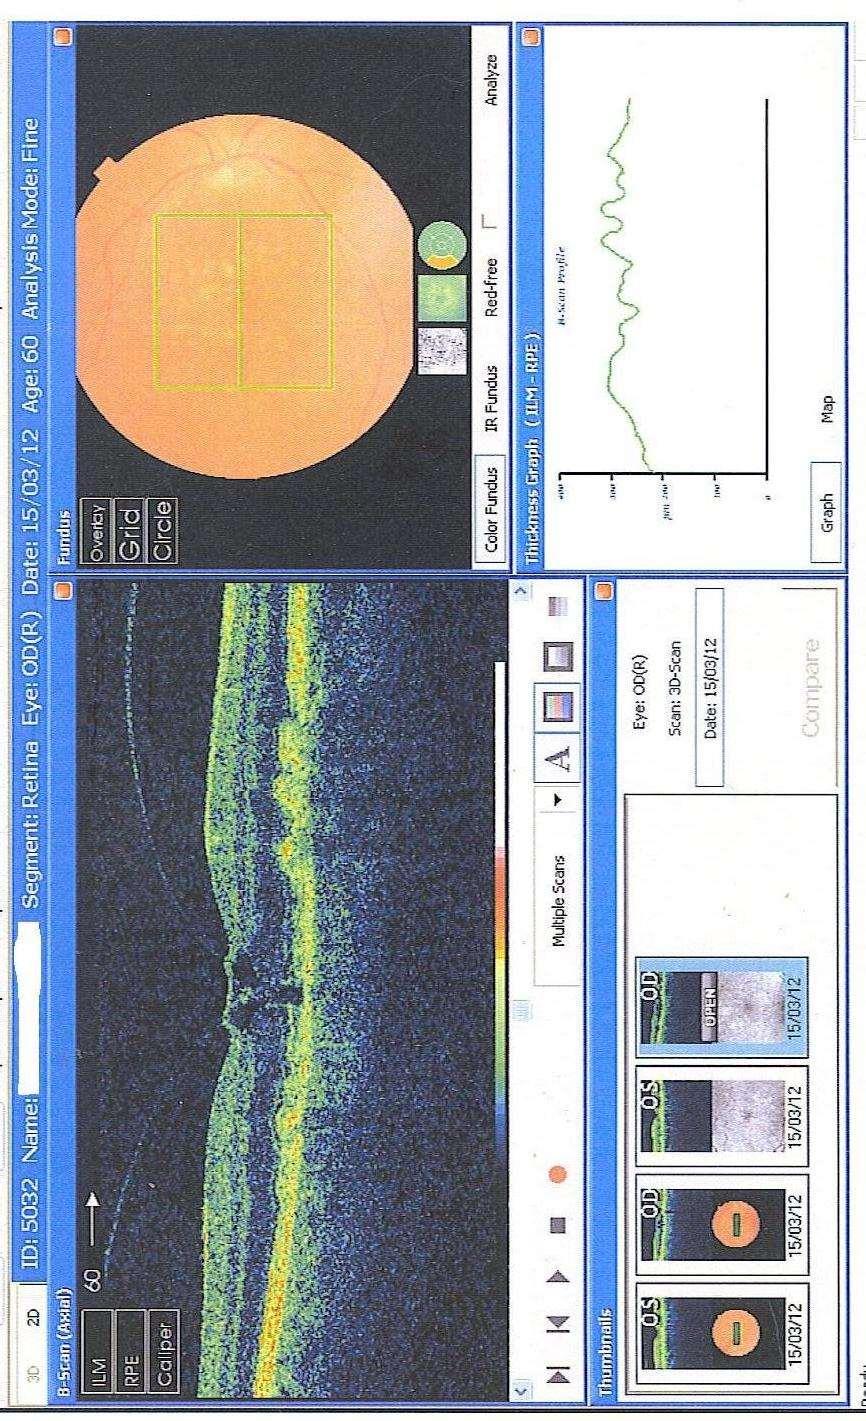 RIGHT EYE OCT 15/3/12 Follow on Advice PVD with retinal traction cause of reduced acuity.